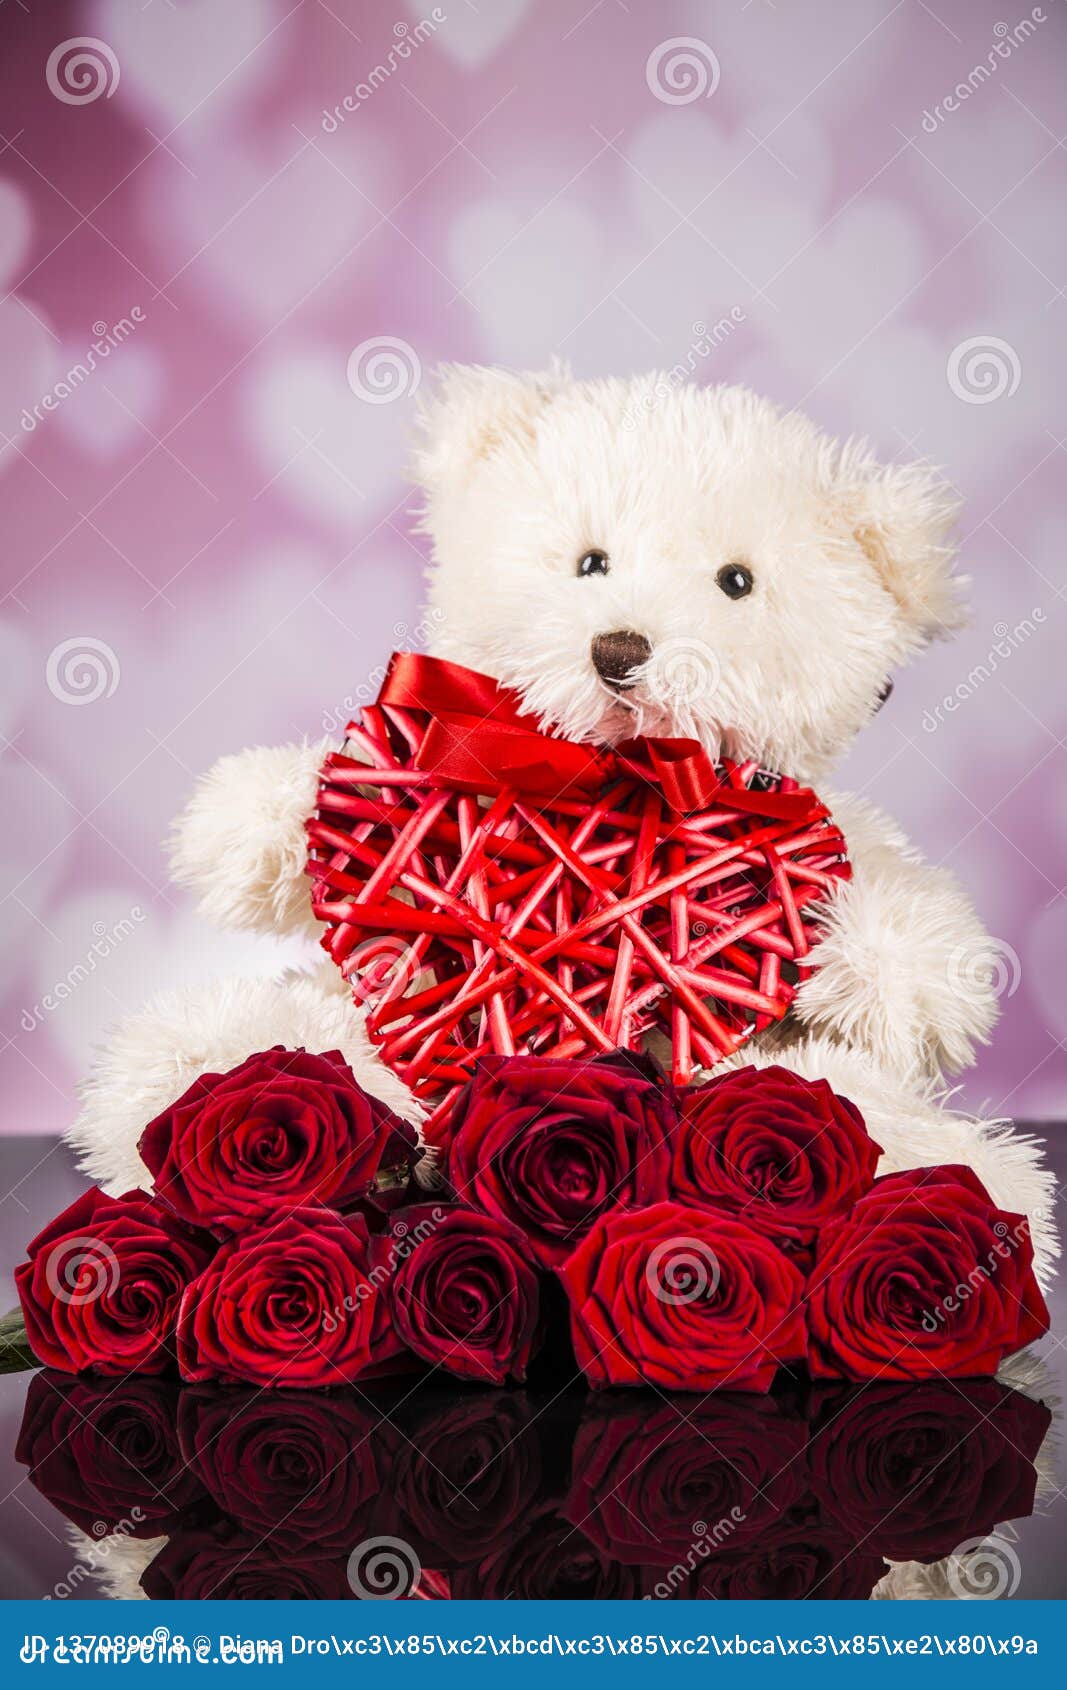 A Wonderful Assortment of Full 4K Teddy Bear Images with Roses - Over ...